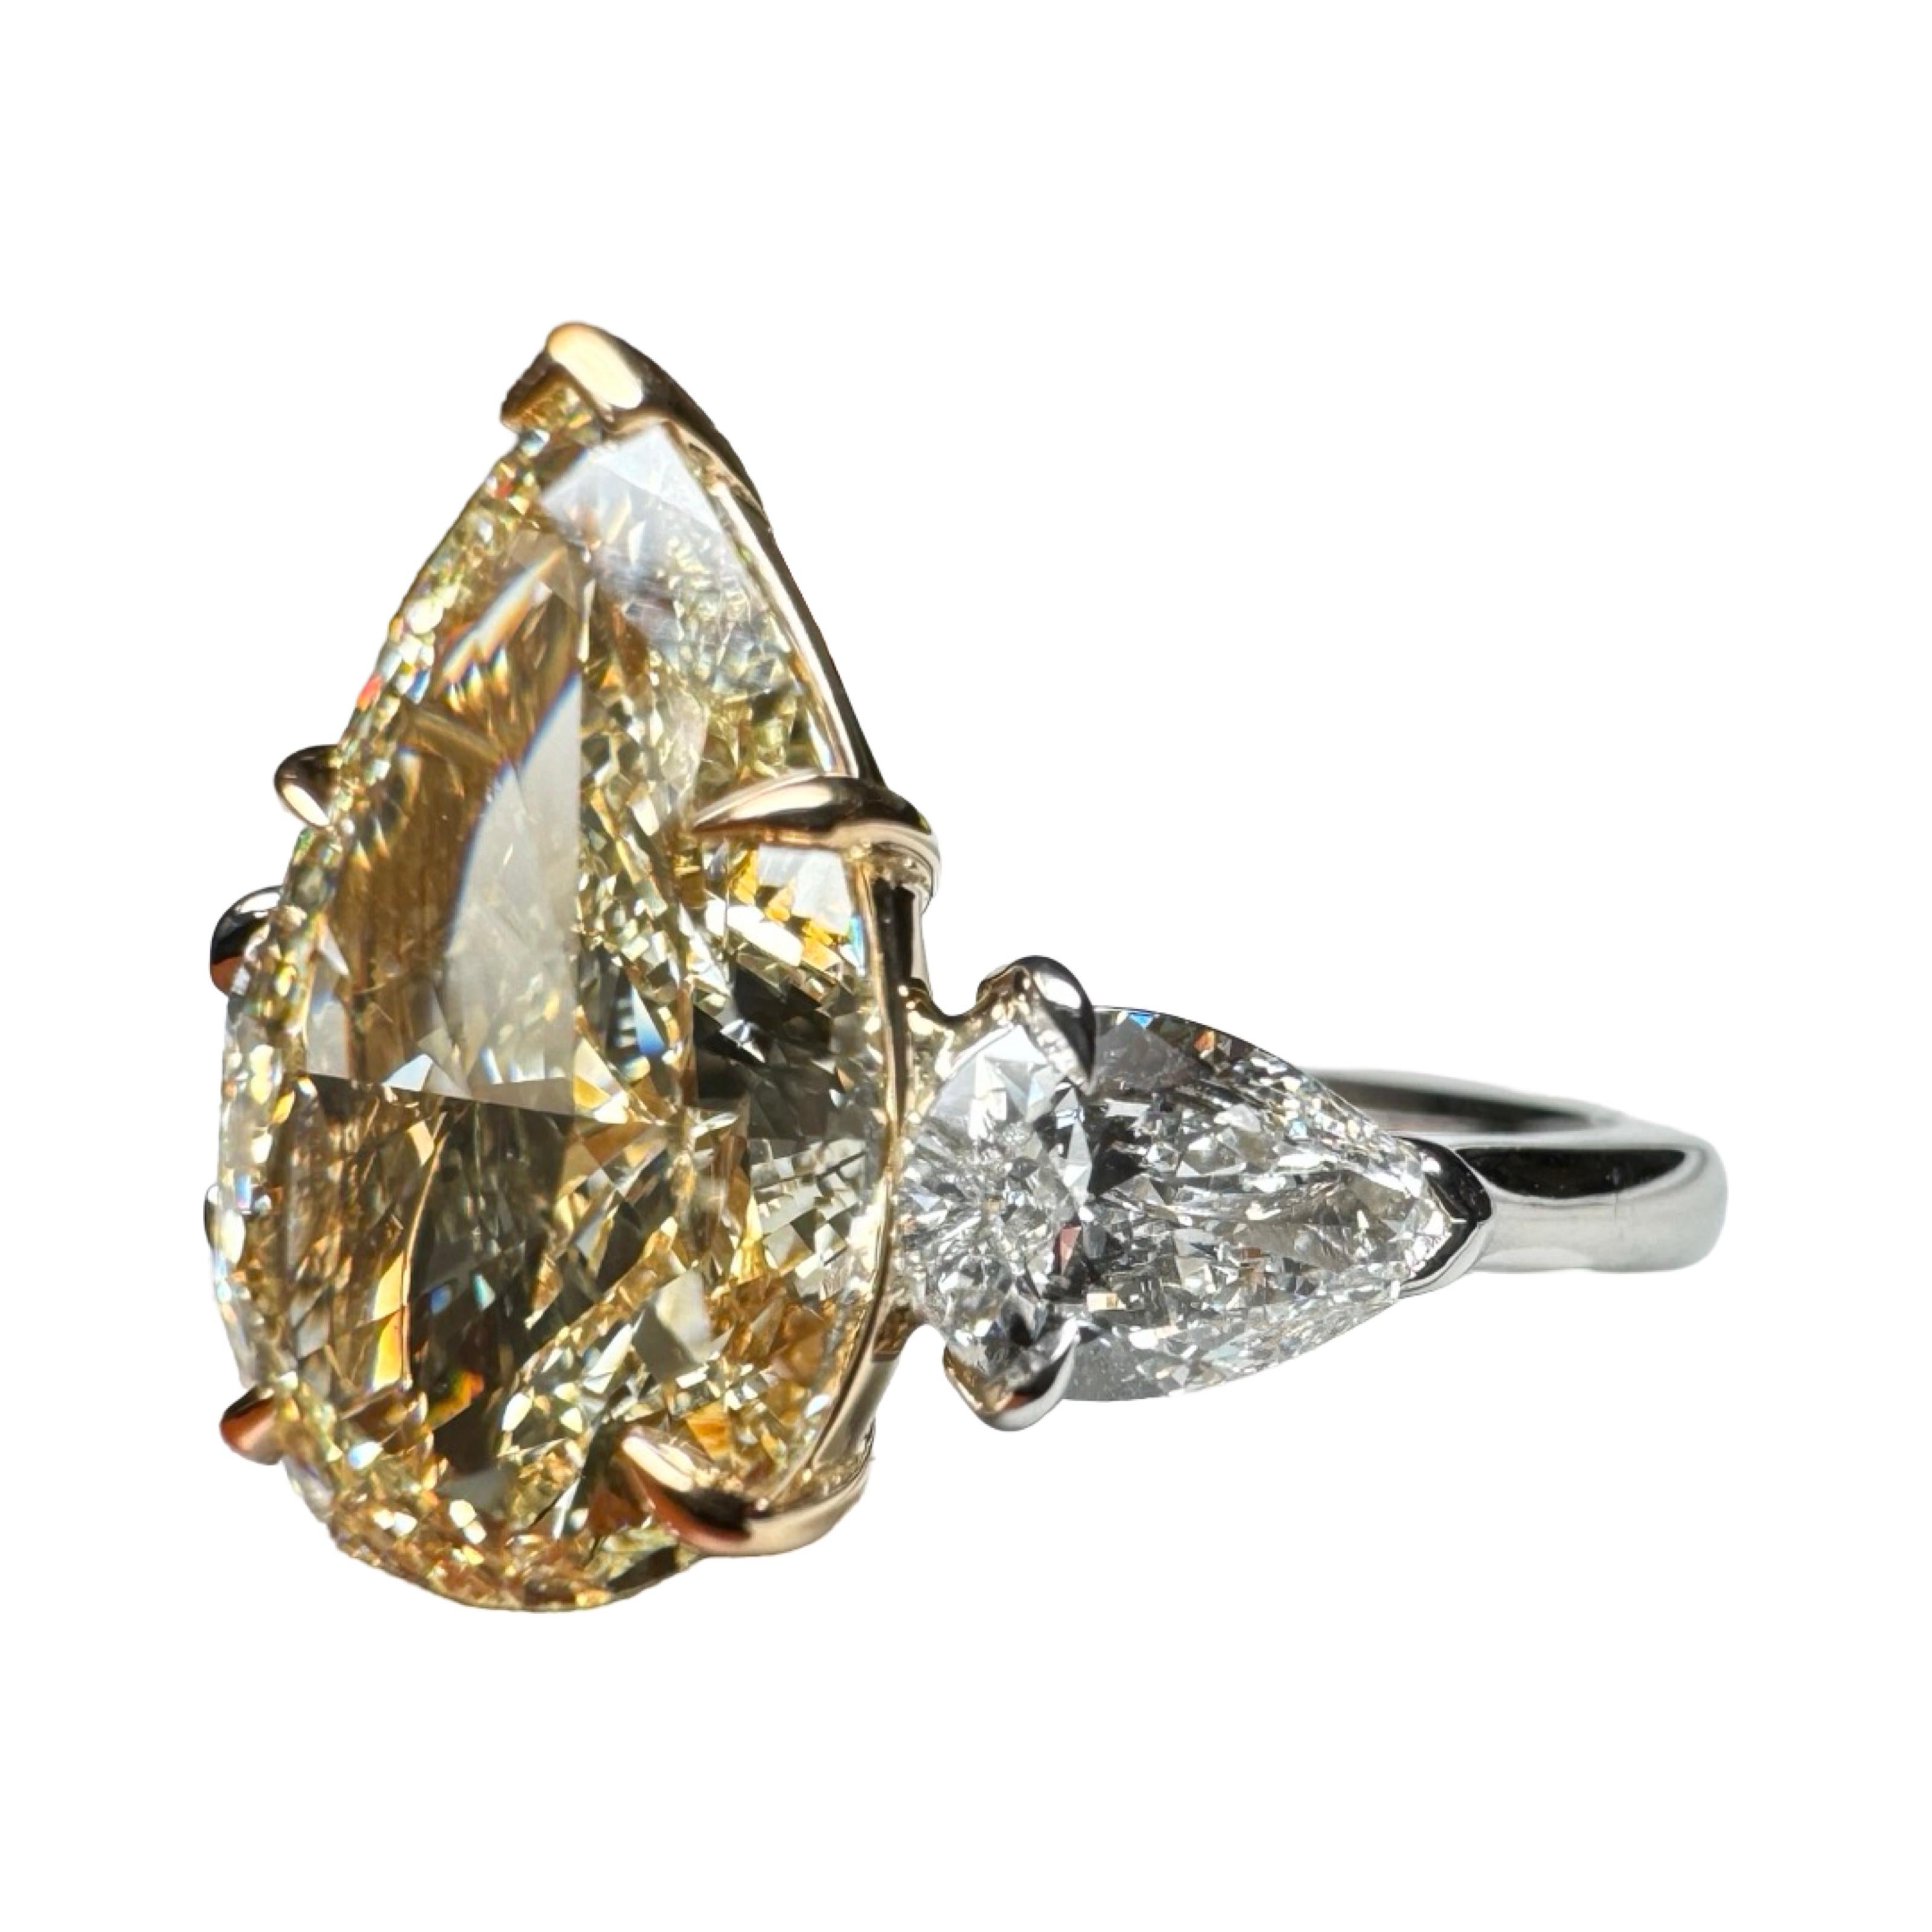 A GIA Certified 4.01 Carat Pear Cut Yellow Diamond 3 Stone Ring designed for a Pear Cut lover!

Our 3 stone ring features a 4 carat, GIA Graded, Light Yellow Diamond with two High-Colorless Pear Shape Diamond Side Stones.
Center stone was Graded by